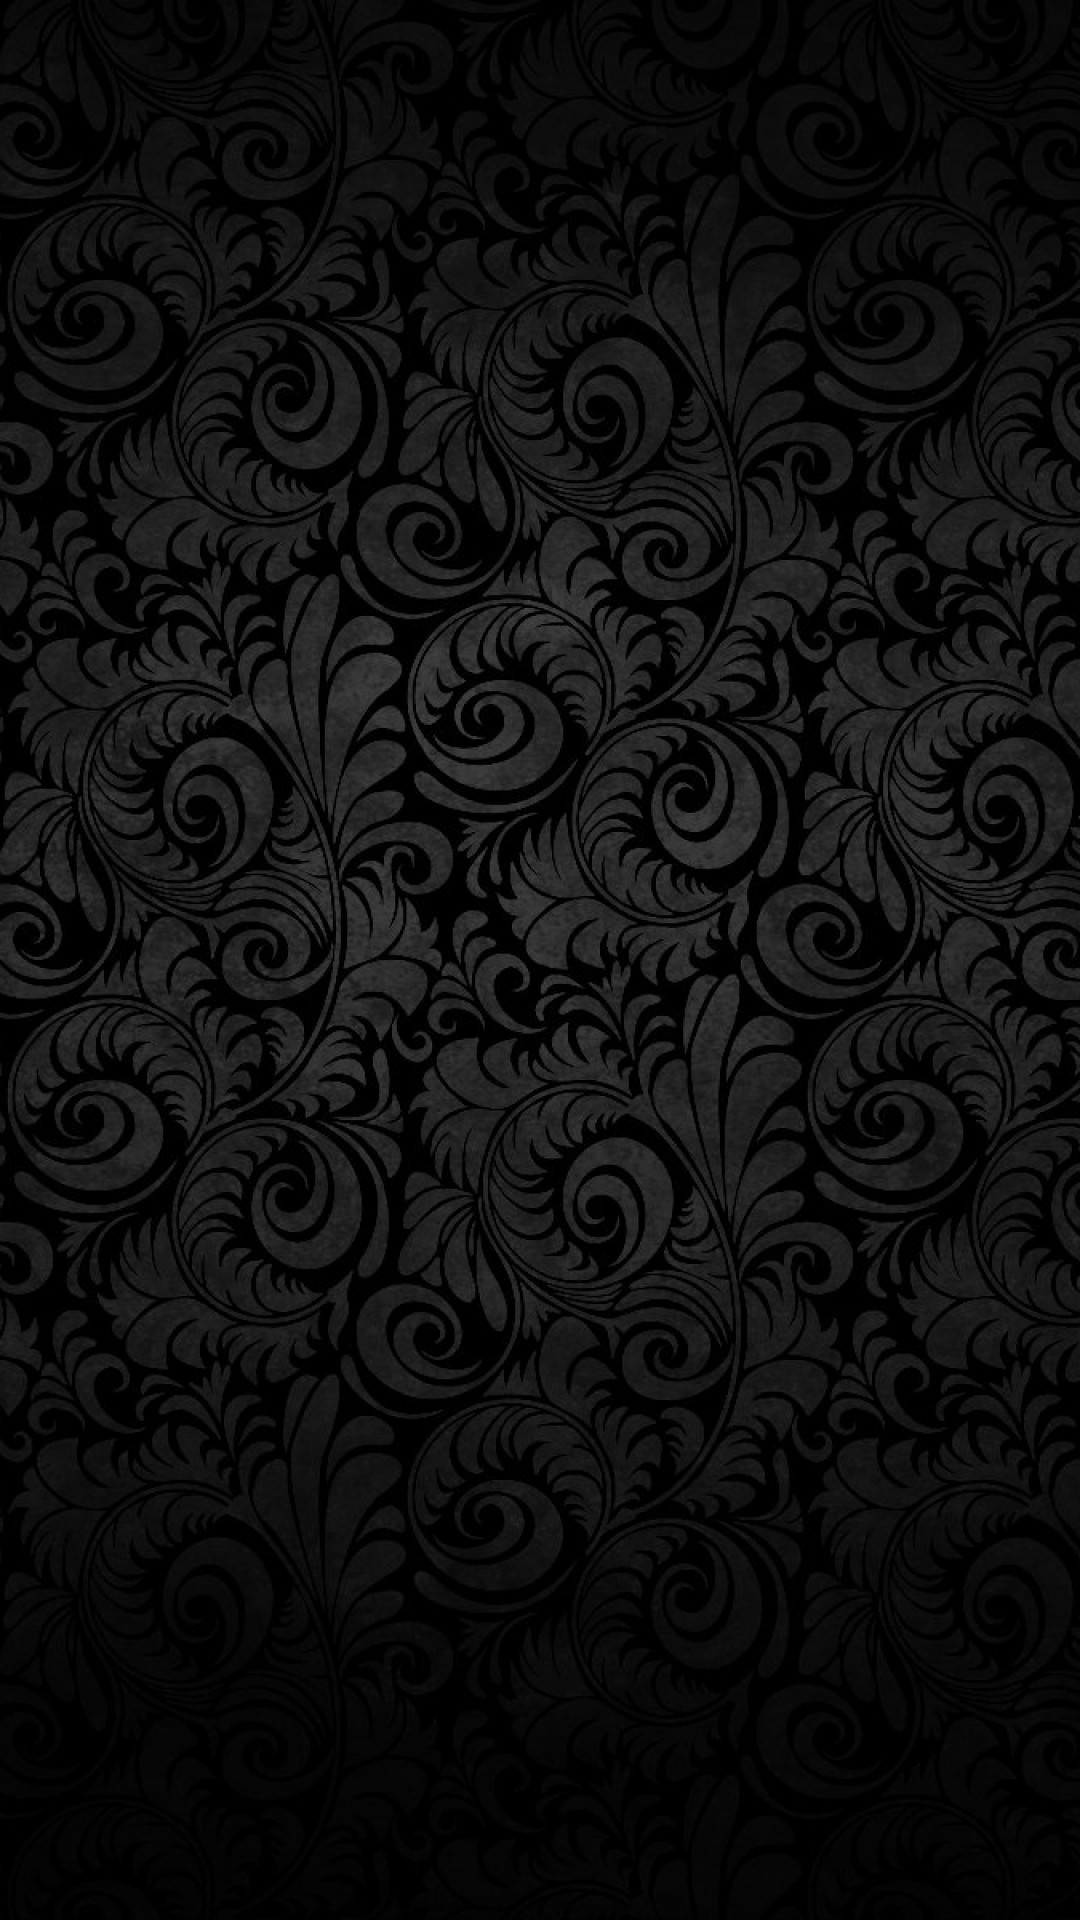 Artistic Full and Backgrounds 1920x1200 ID floral black lace iphone HD  phone wallpaper  Pxfuel